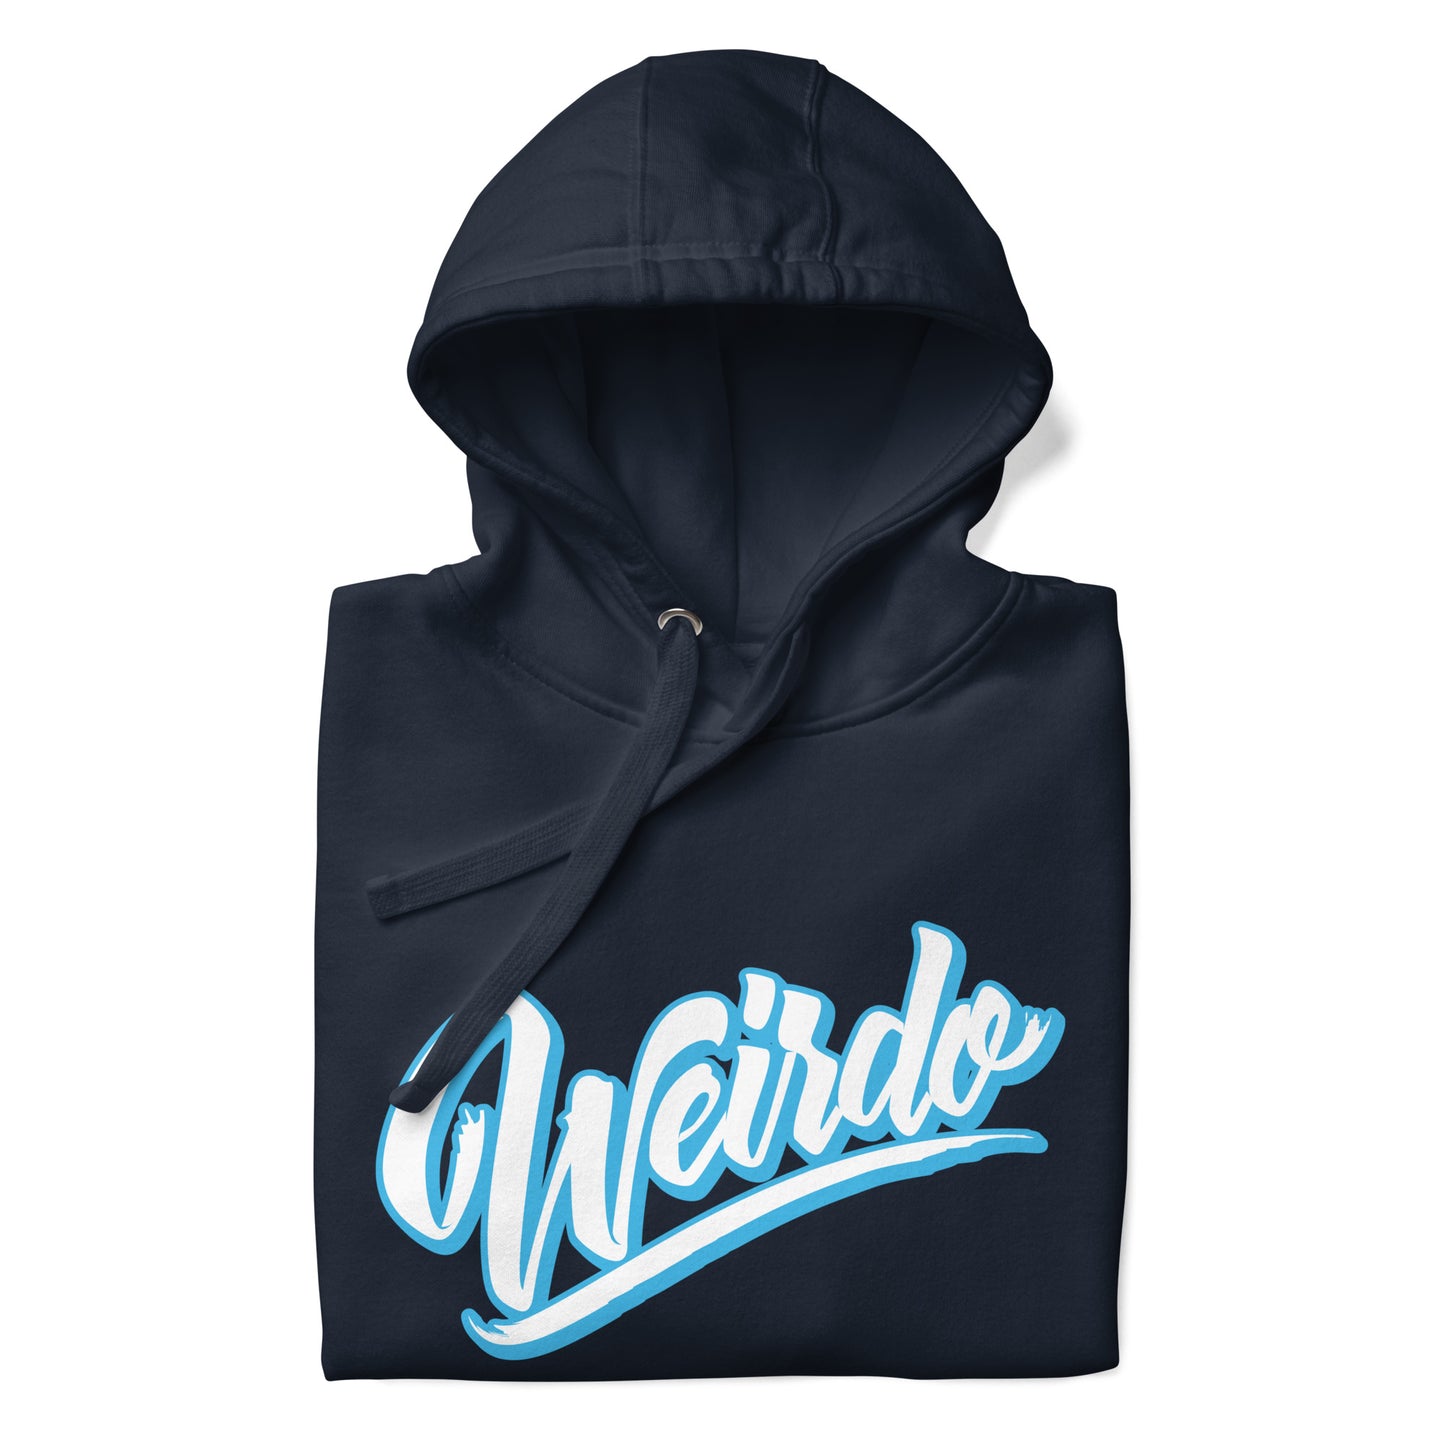 folded hoodie Weirdo navy by B.Different Clothing independent streetwear brand inspired by street art graffitihoodie Weirdo gray by B.Different Clothing independent streetwear brand inspired by street art graffiti